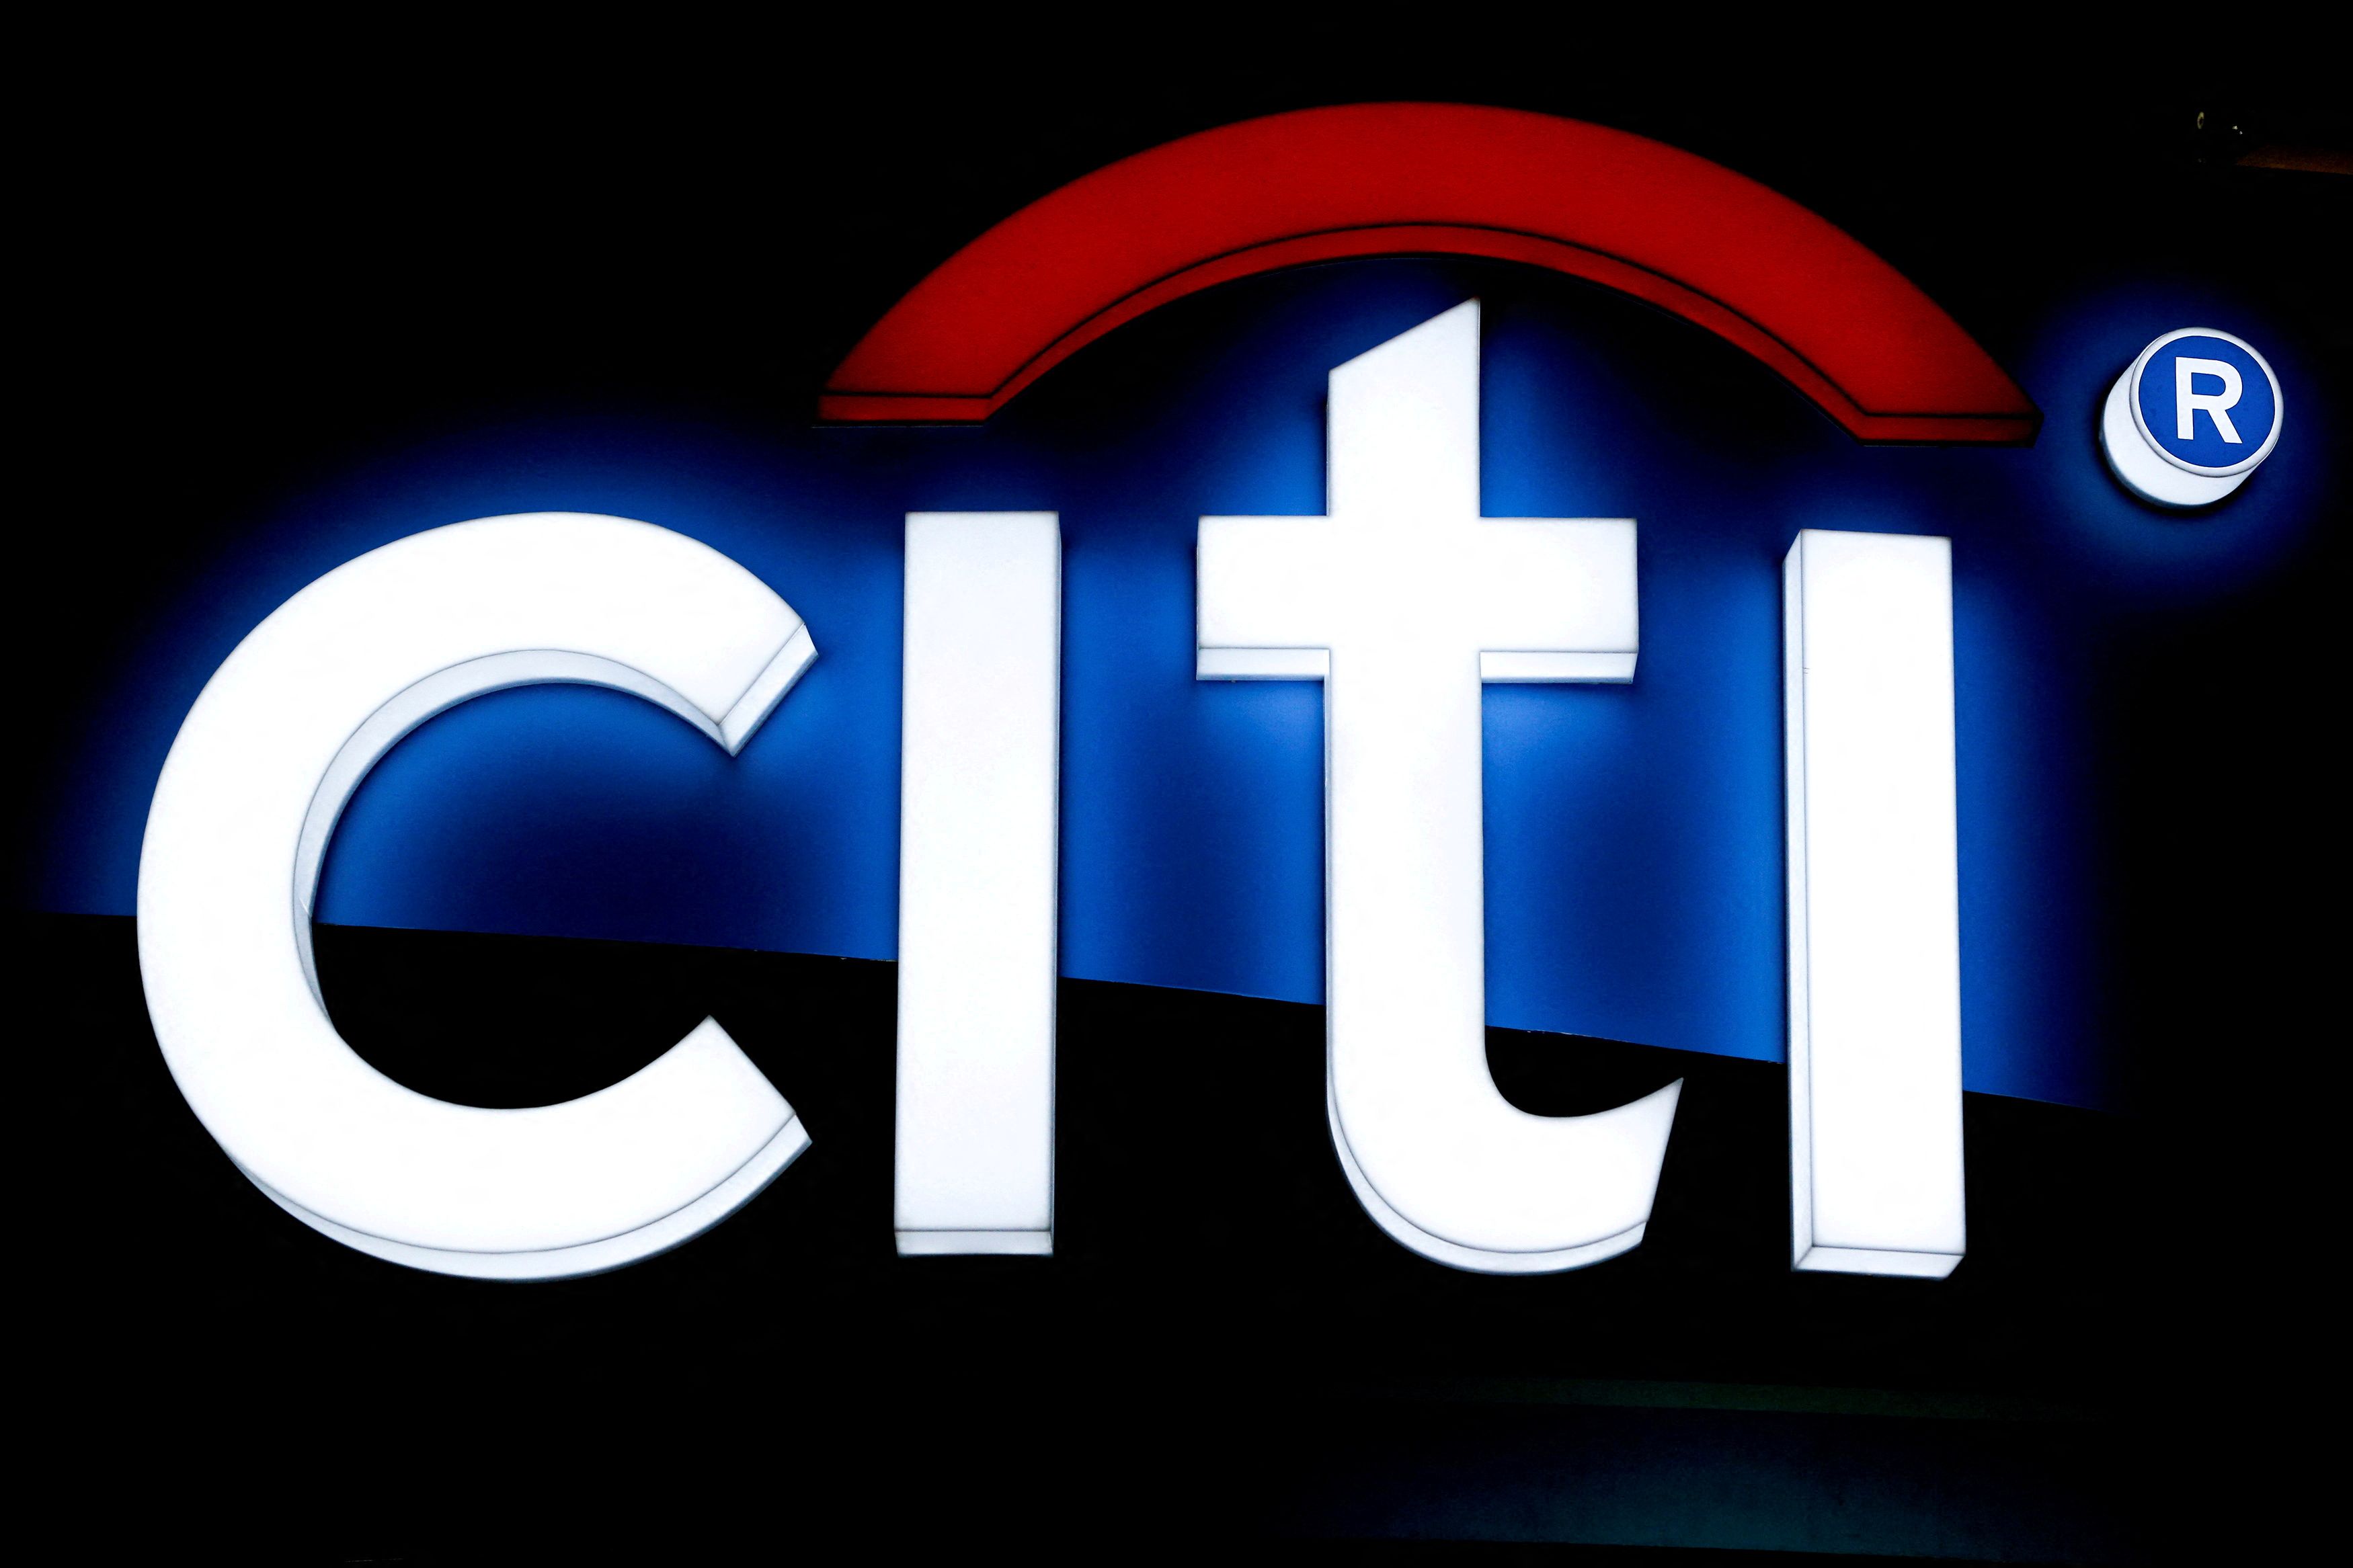 The logo of Citi bank is pictured in Thailand